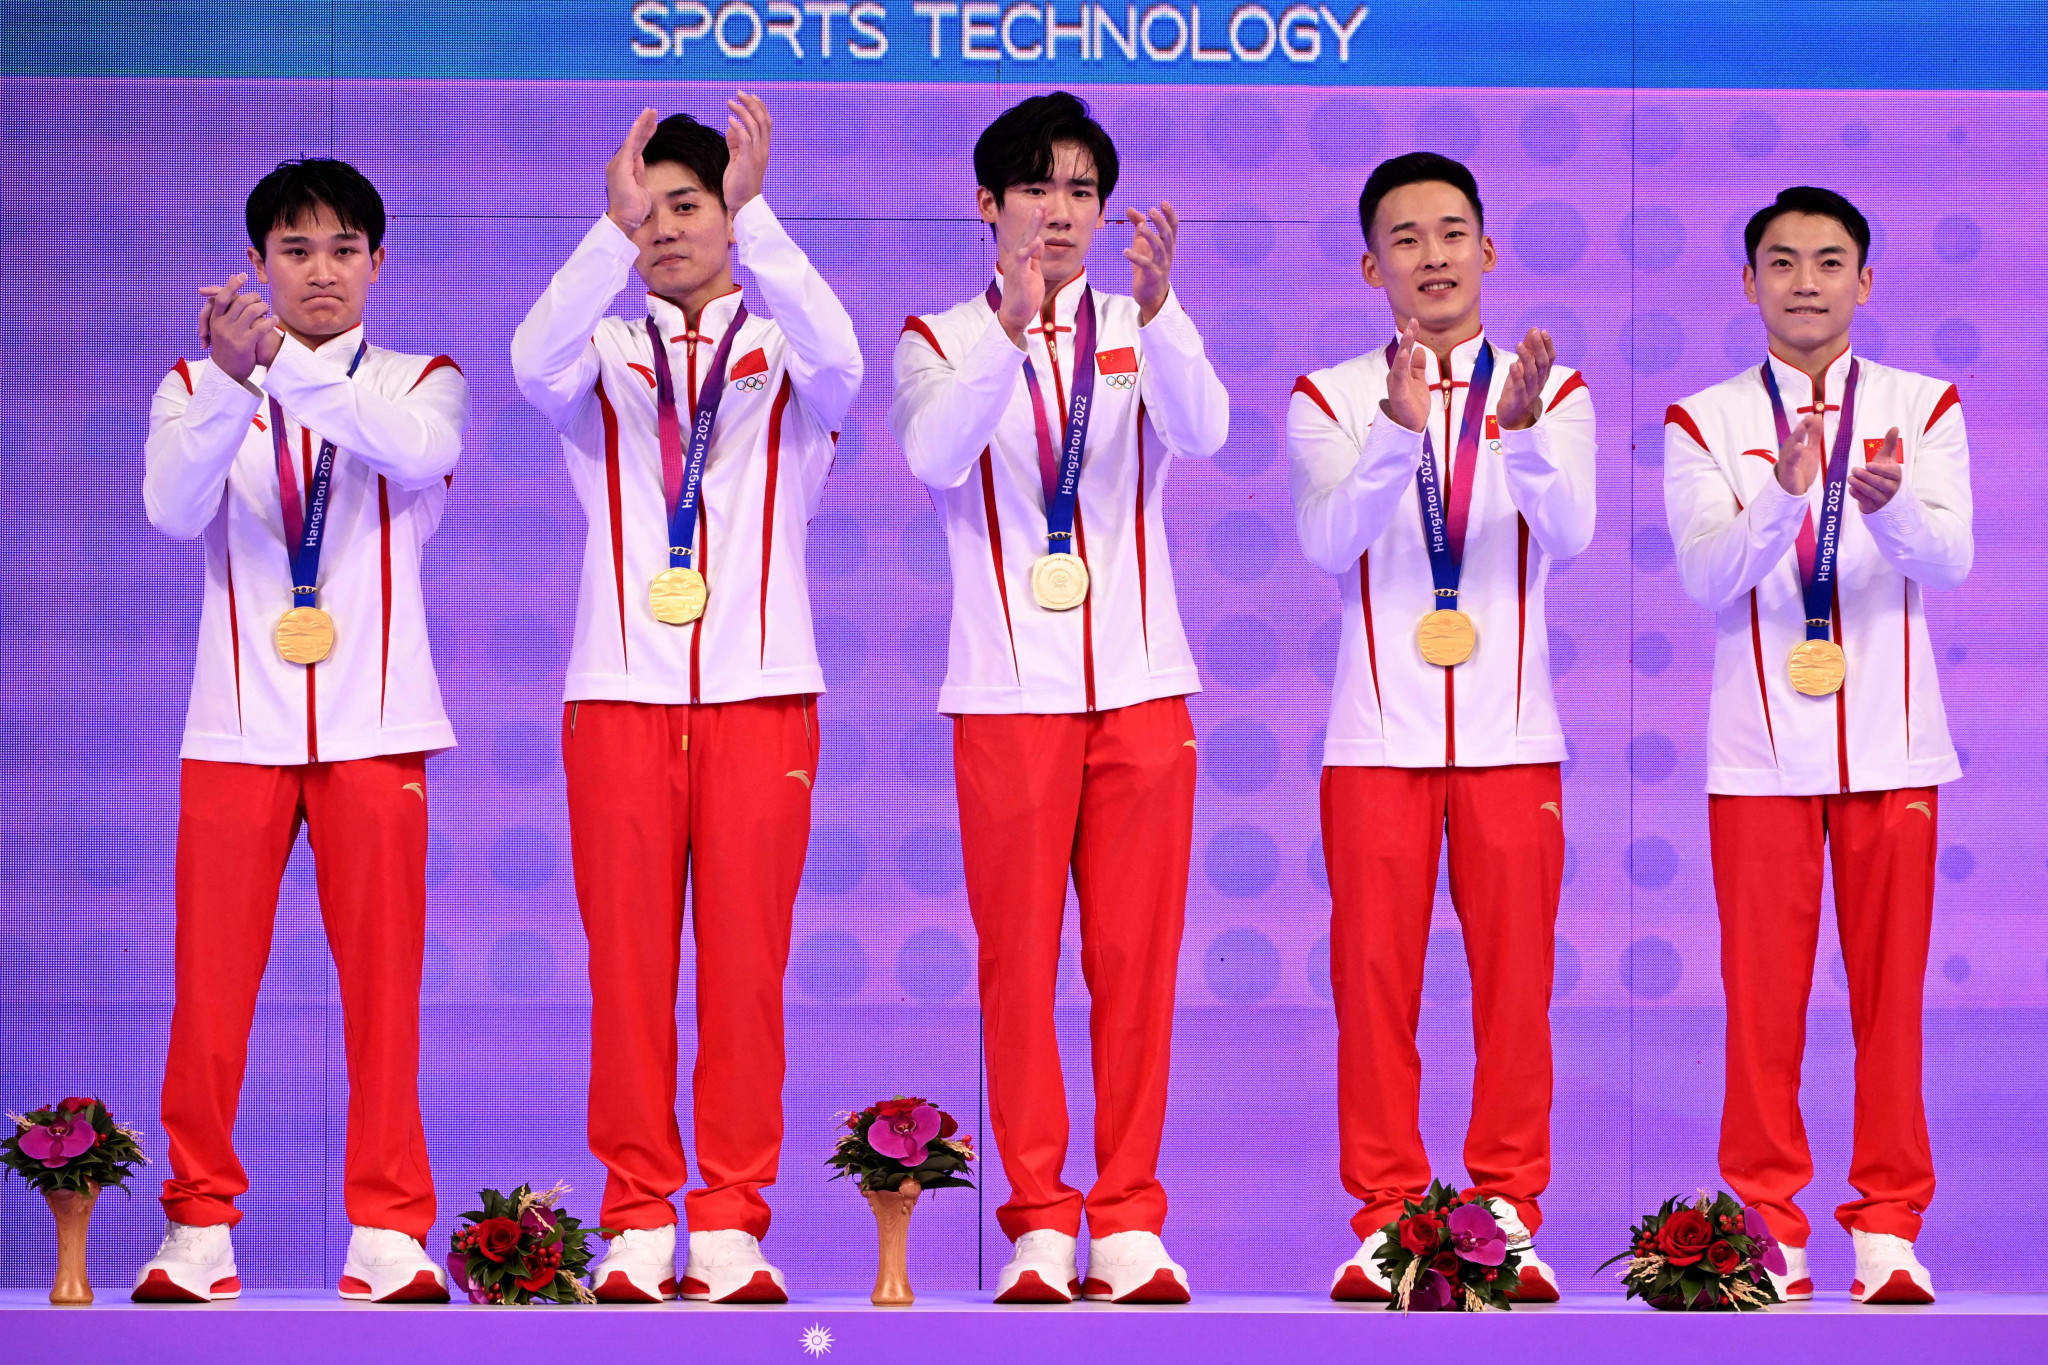 China caught and overtook Japan in the men's artistic gymnastics team final in a thrilling final rotation to win gold ©Getty Images